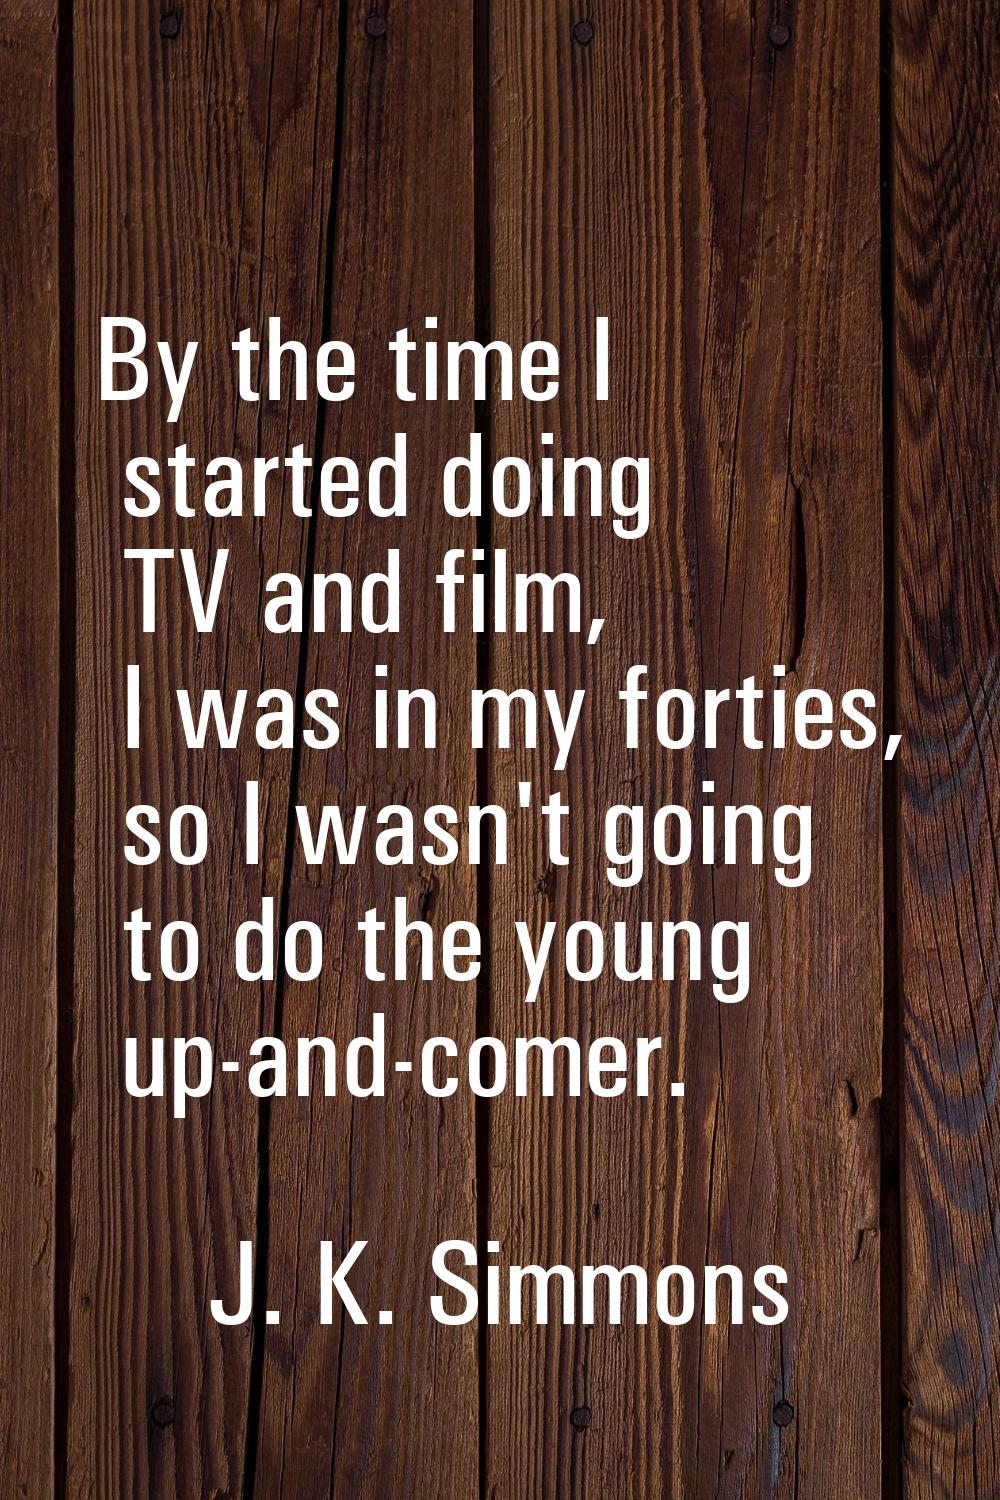 By the time I started doing TV and film, I was in my forties, so I wasn't going to do the young up-